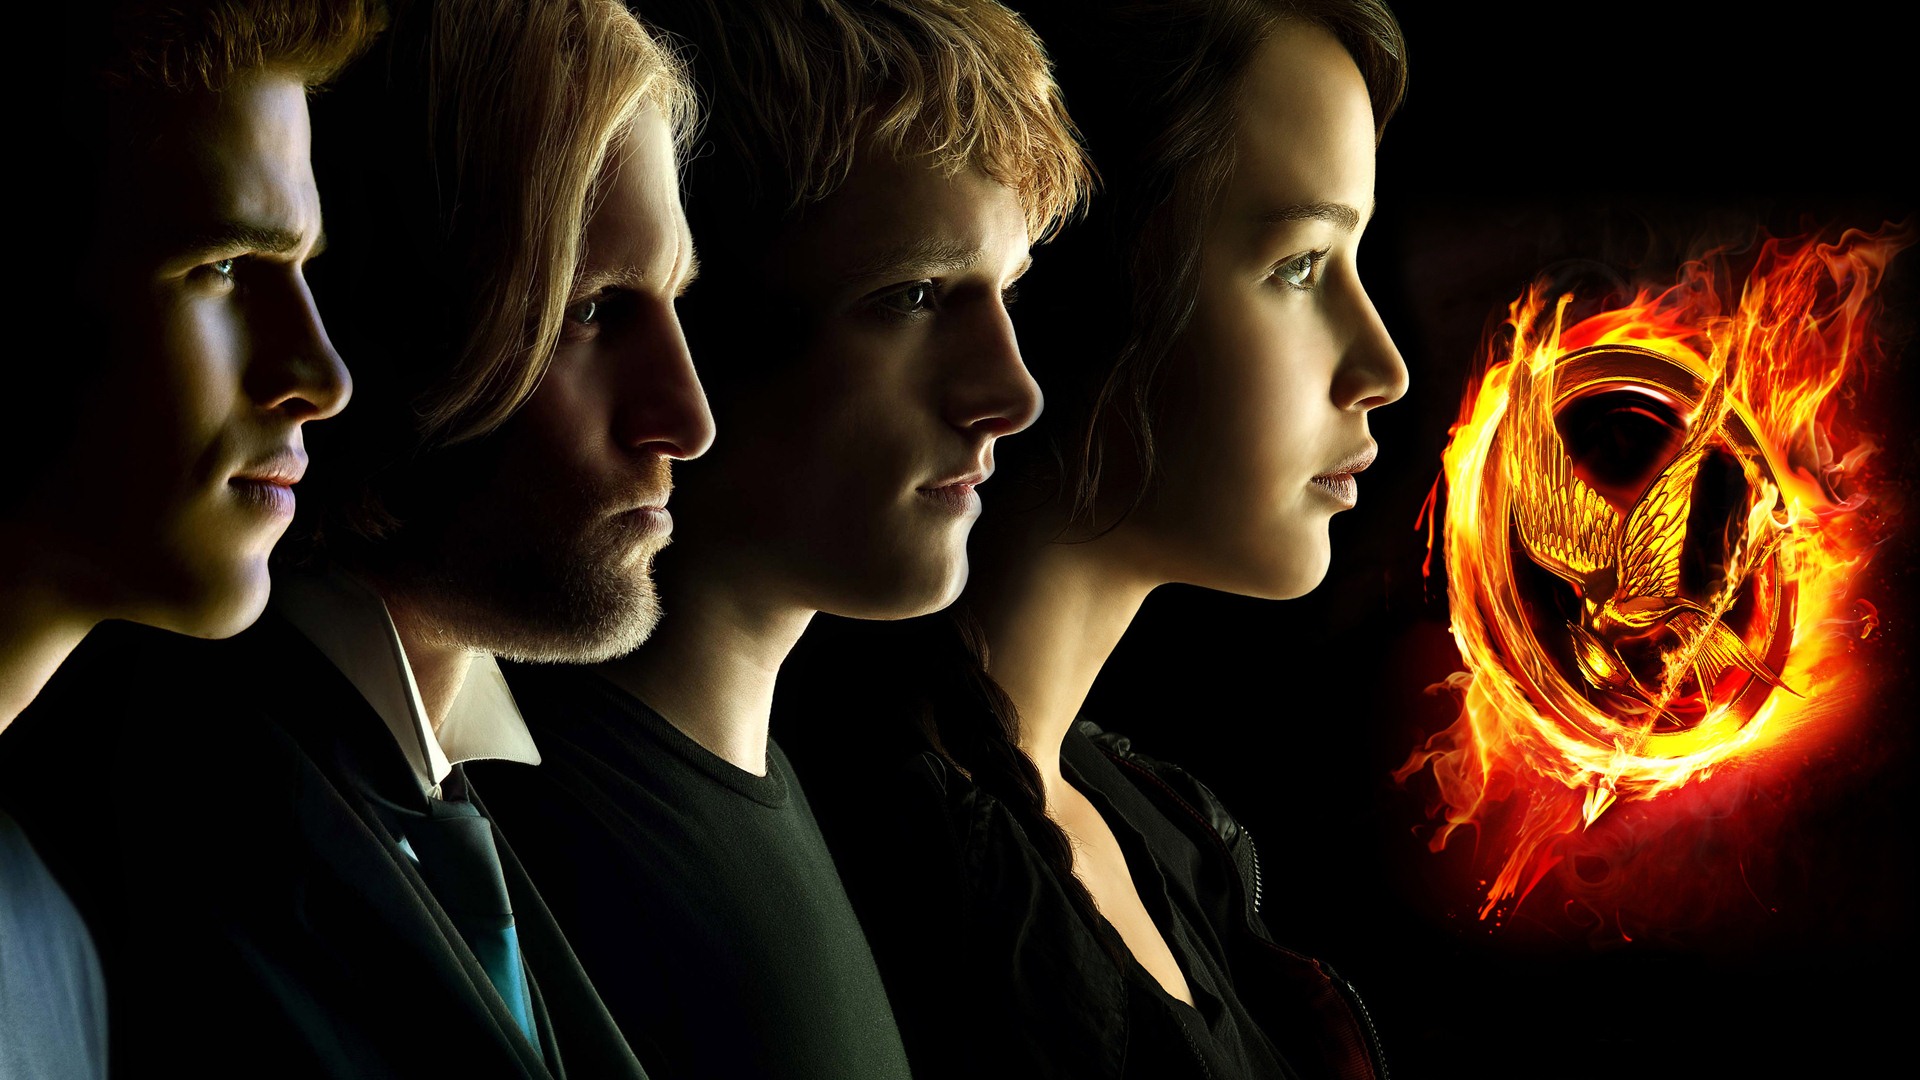 The Hunger Games HD wallpapers #9 - 1920x1080